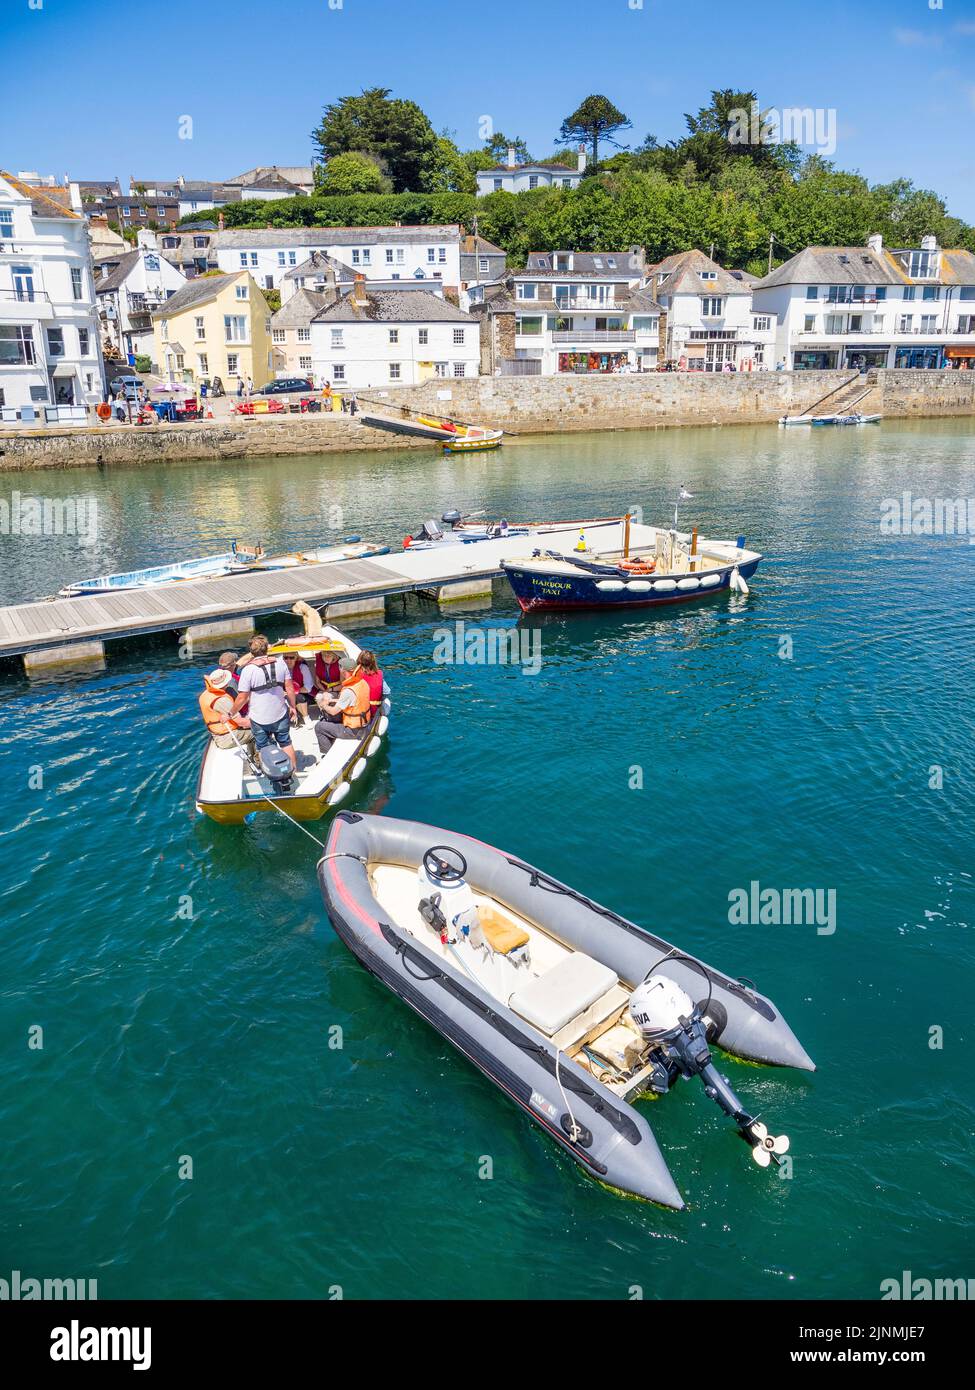 Jetty St Mawes Harbour, St Mawes, Falmouth, Cornwall, England, UK, GB. Stock Photo